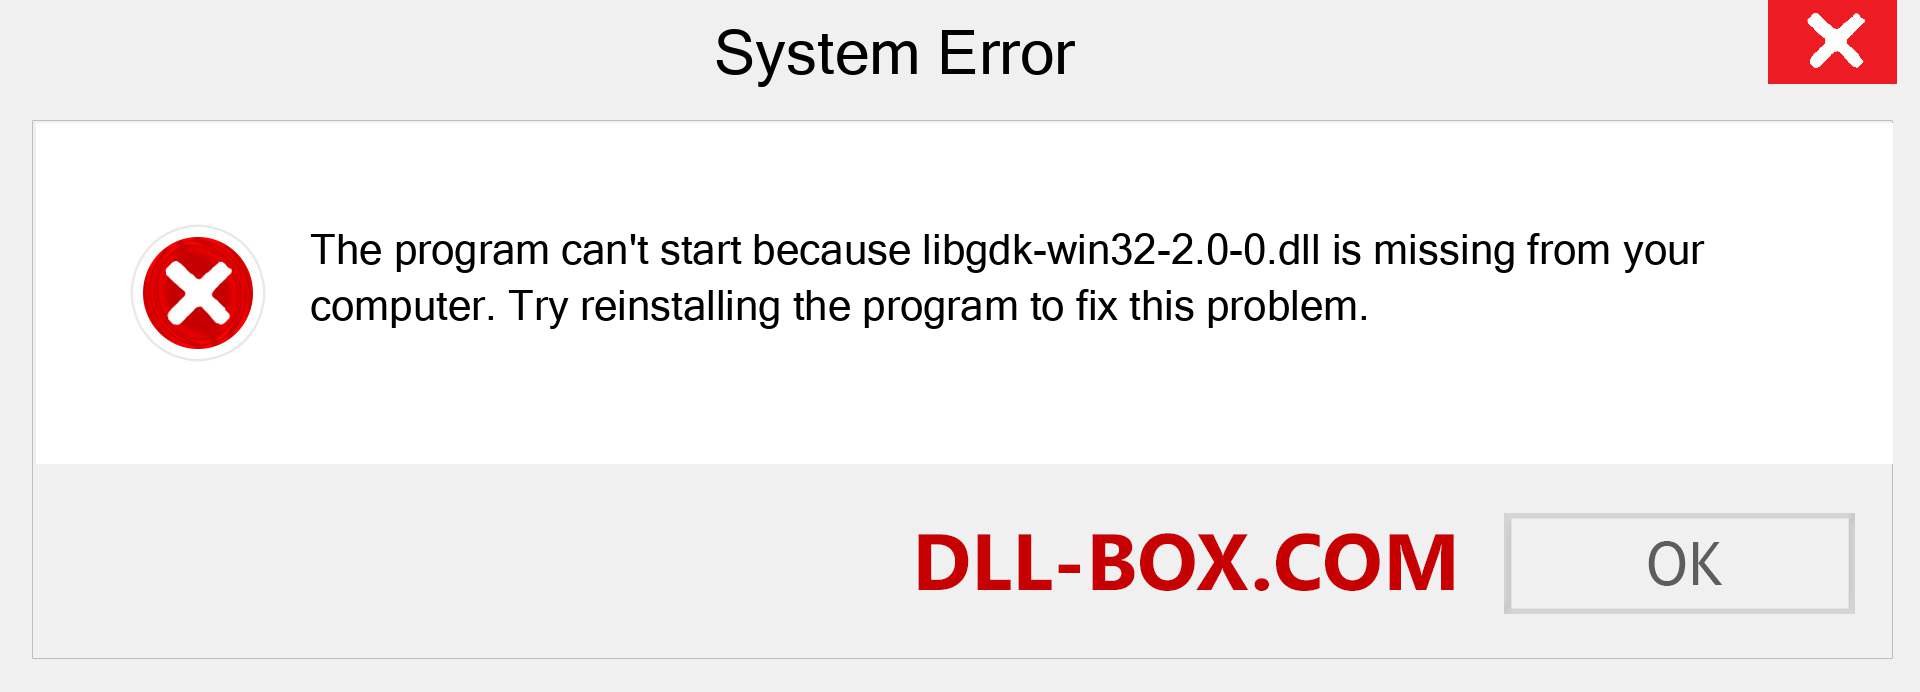  libgdk-win32-2.0-0.dll file is missing?. Download for Windows 7, 8, 10 - Fix  libgdk-win32-2.0-0 dll Missing Error on Windows, photos, images